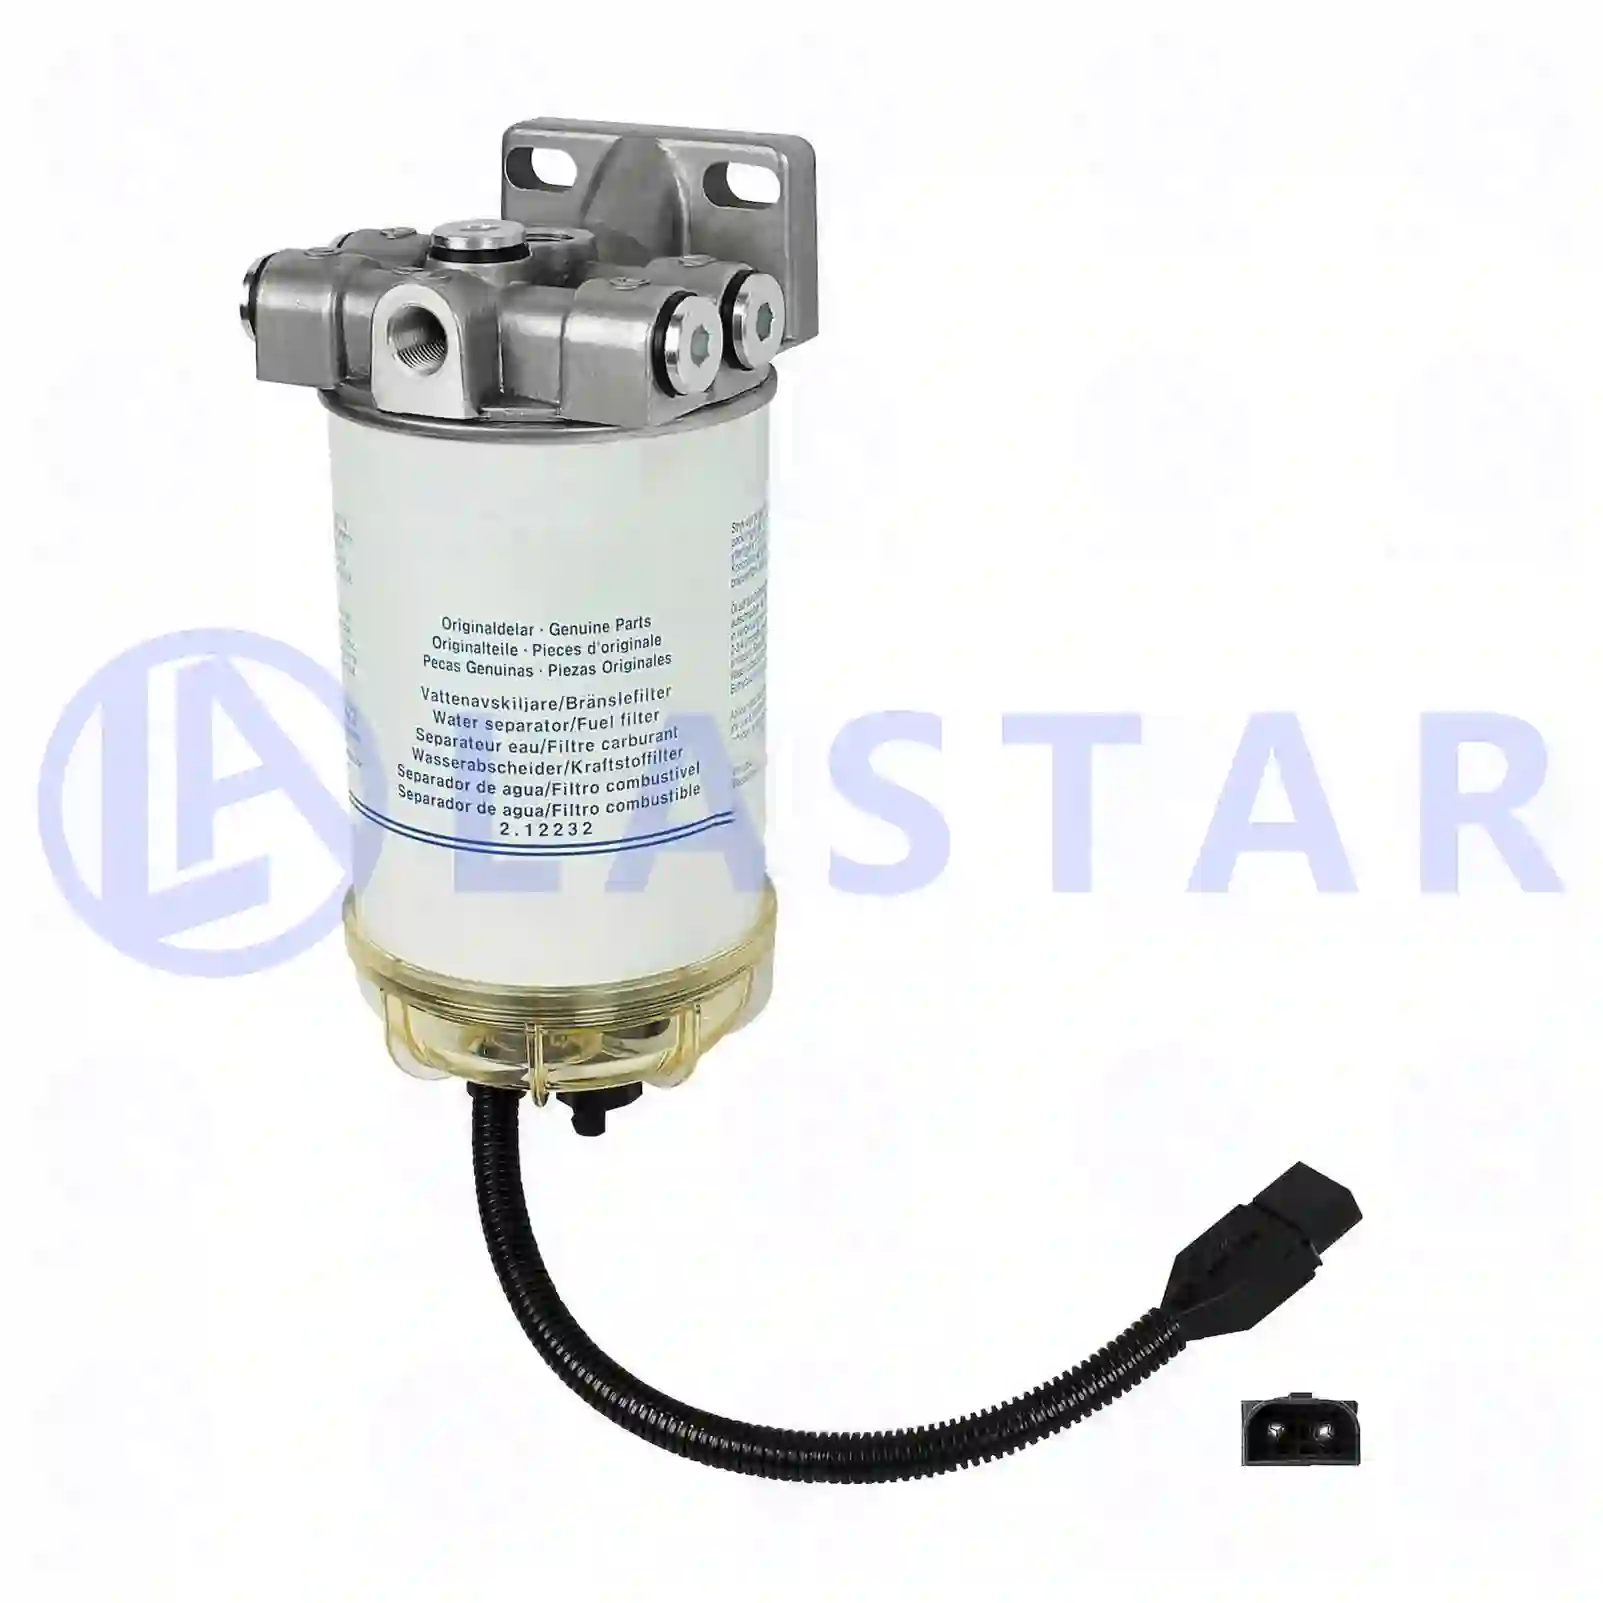 Fuel filter, water separator, complete - fuel preheater, 77723958, 8159974 ||  77723958 Lastar Spare Part | Truck Spare Parts, Auotomotive Spare Parts Fuel filter, water separator, complete - fuel preheater, 77723958, 8159974 ||  77723958 Lastar Spare Part | Truck Spare Parts, Auotomotive Spare Parts